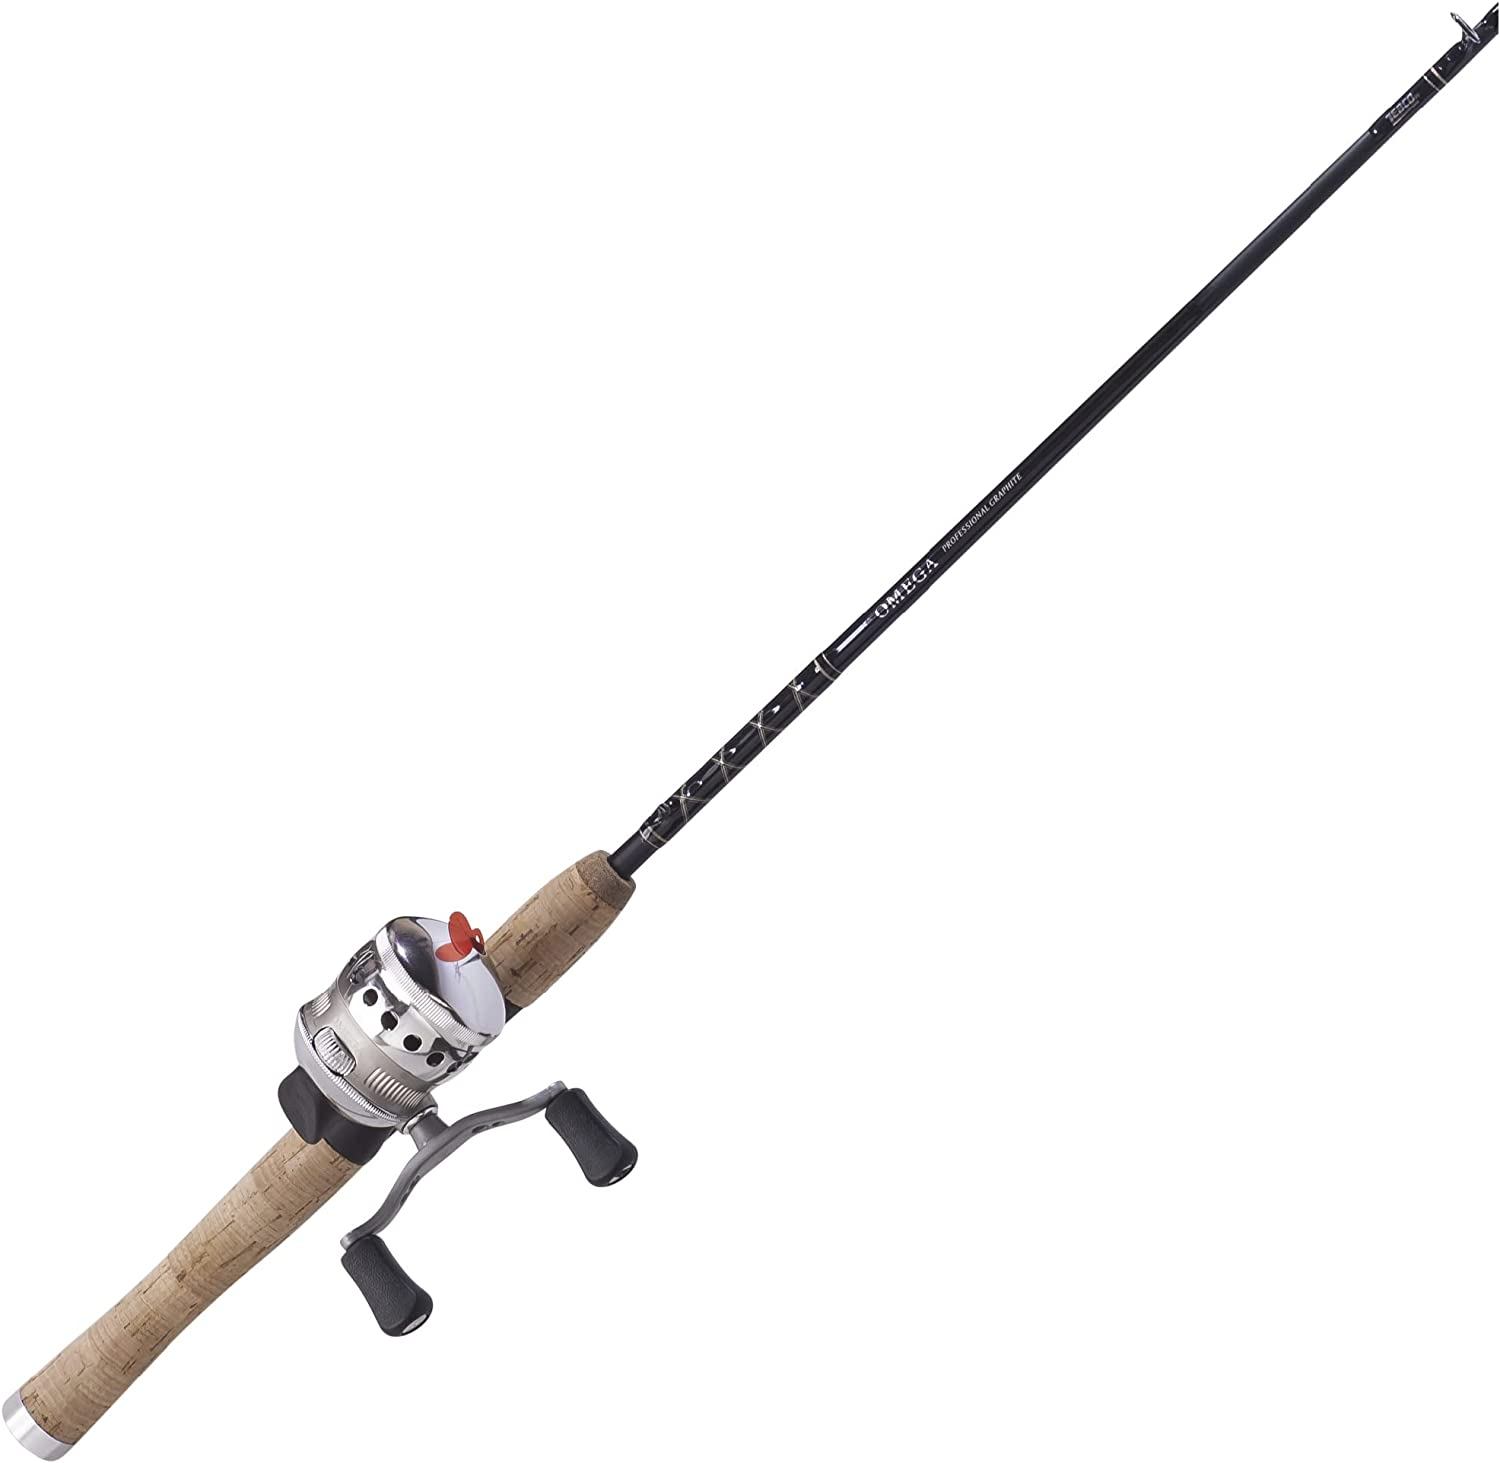 5. Zebco Omega Combo - Best Spincast Combo For Trout